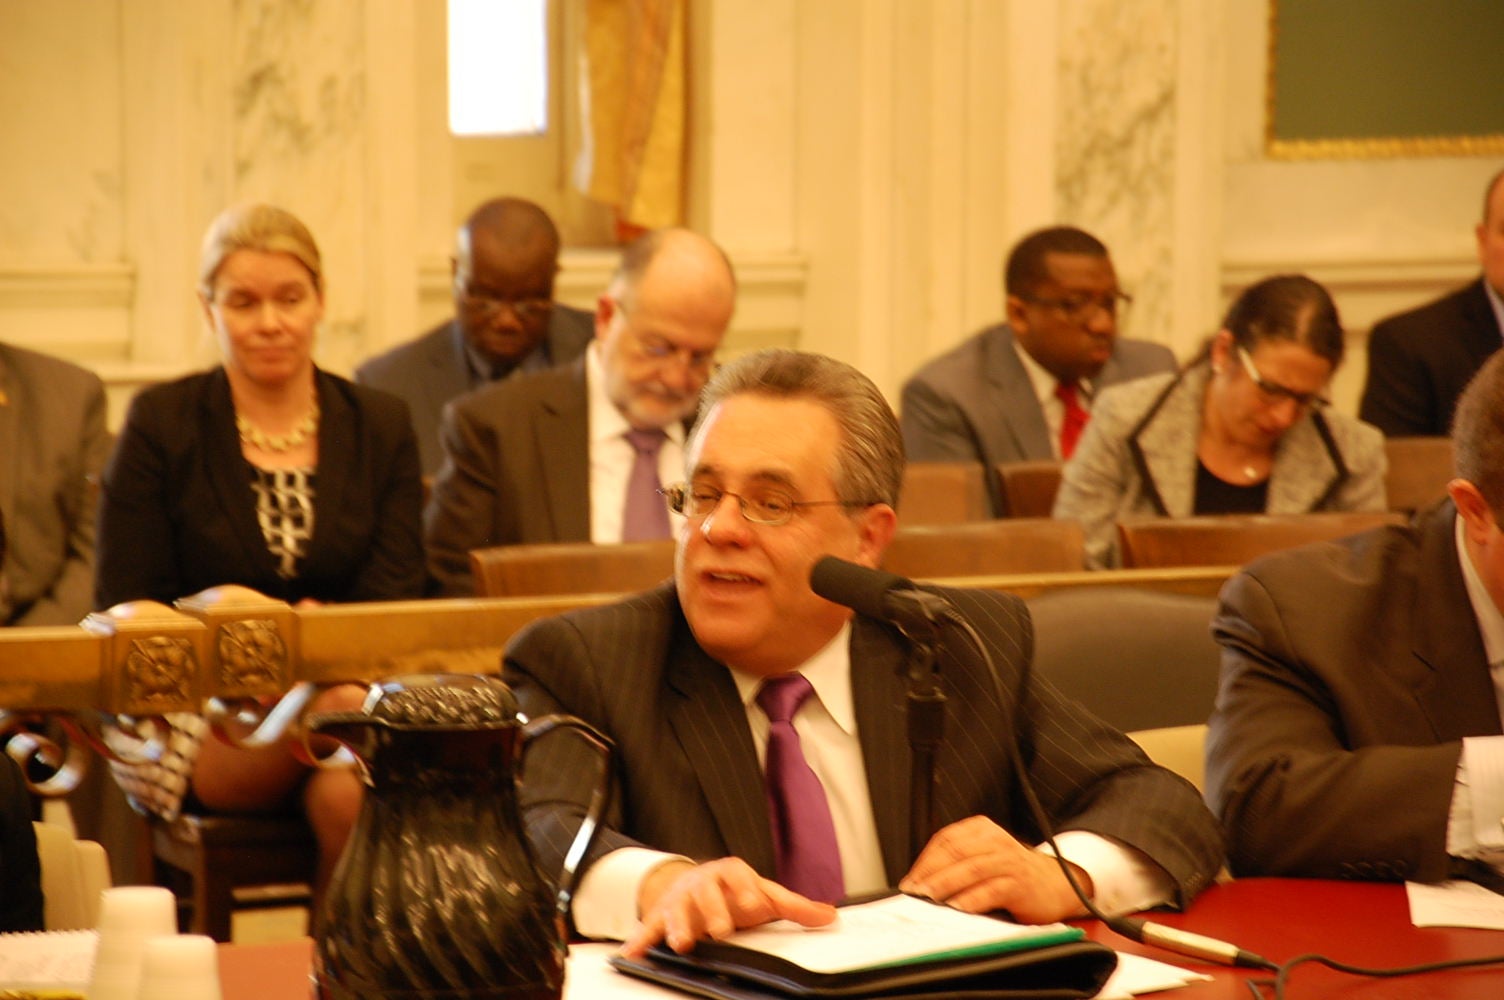 Philadelphia Licenses and Inspections Commissioner David Perri testifies Tuesday before City Council. (Tom MacDonald/WHYY)